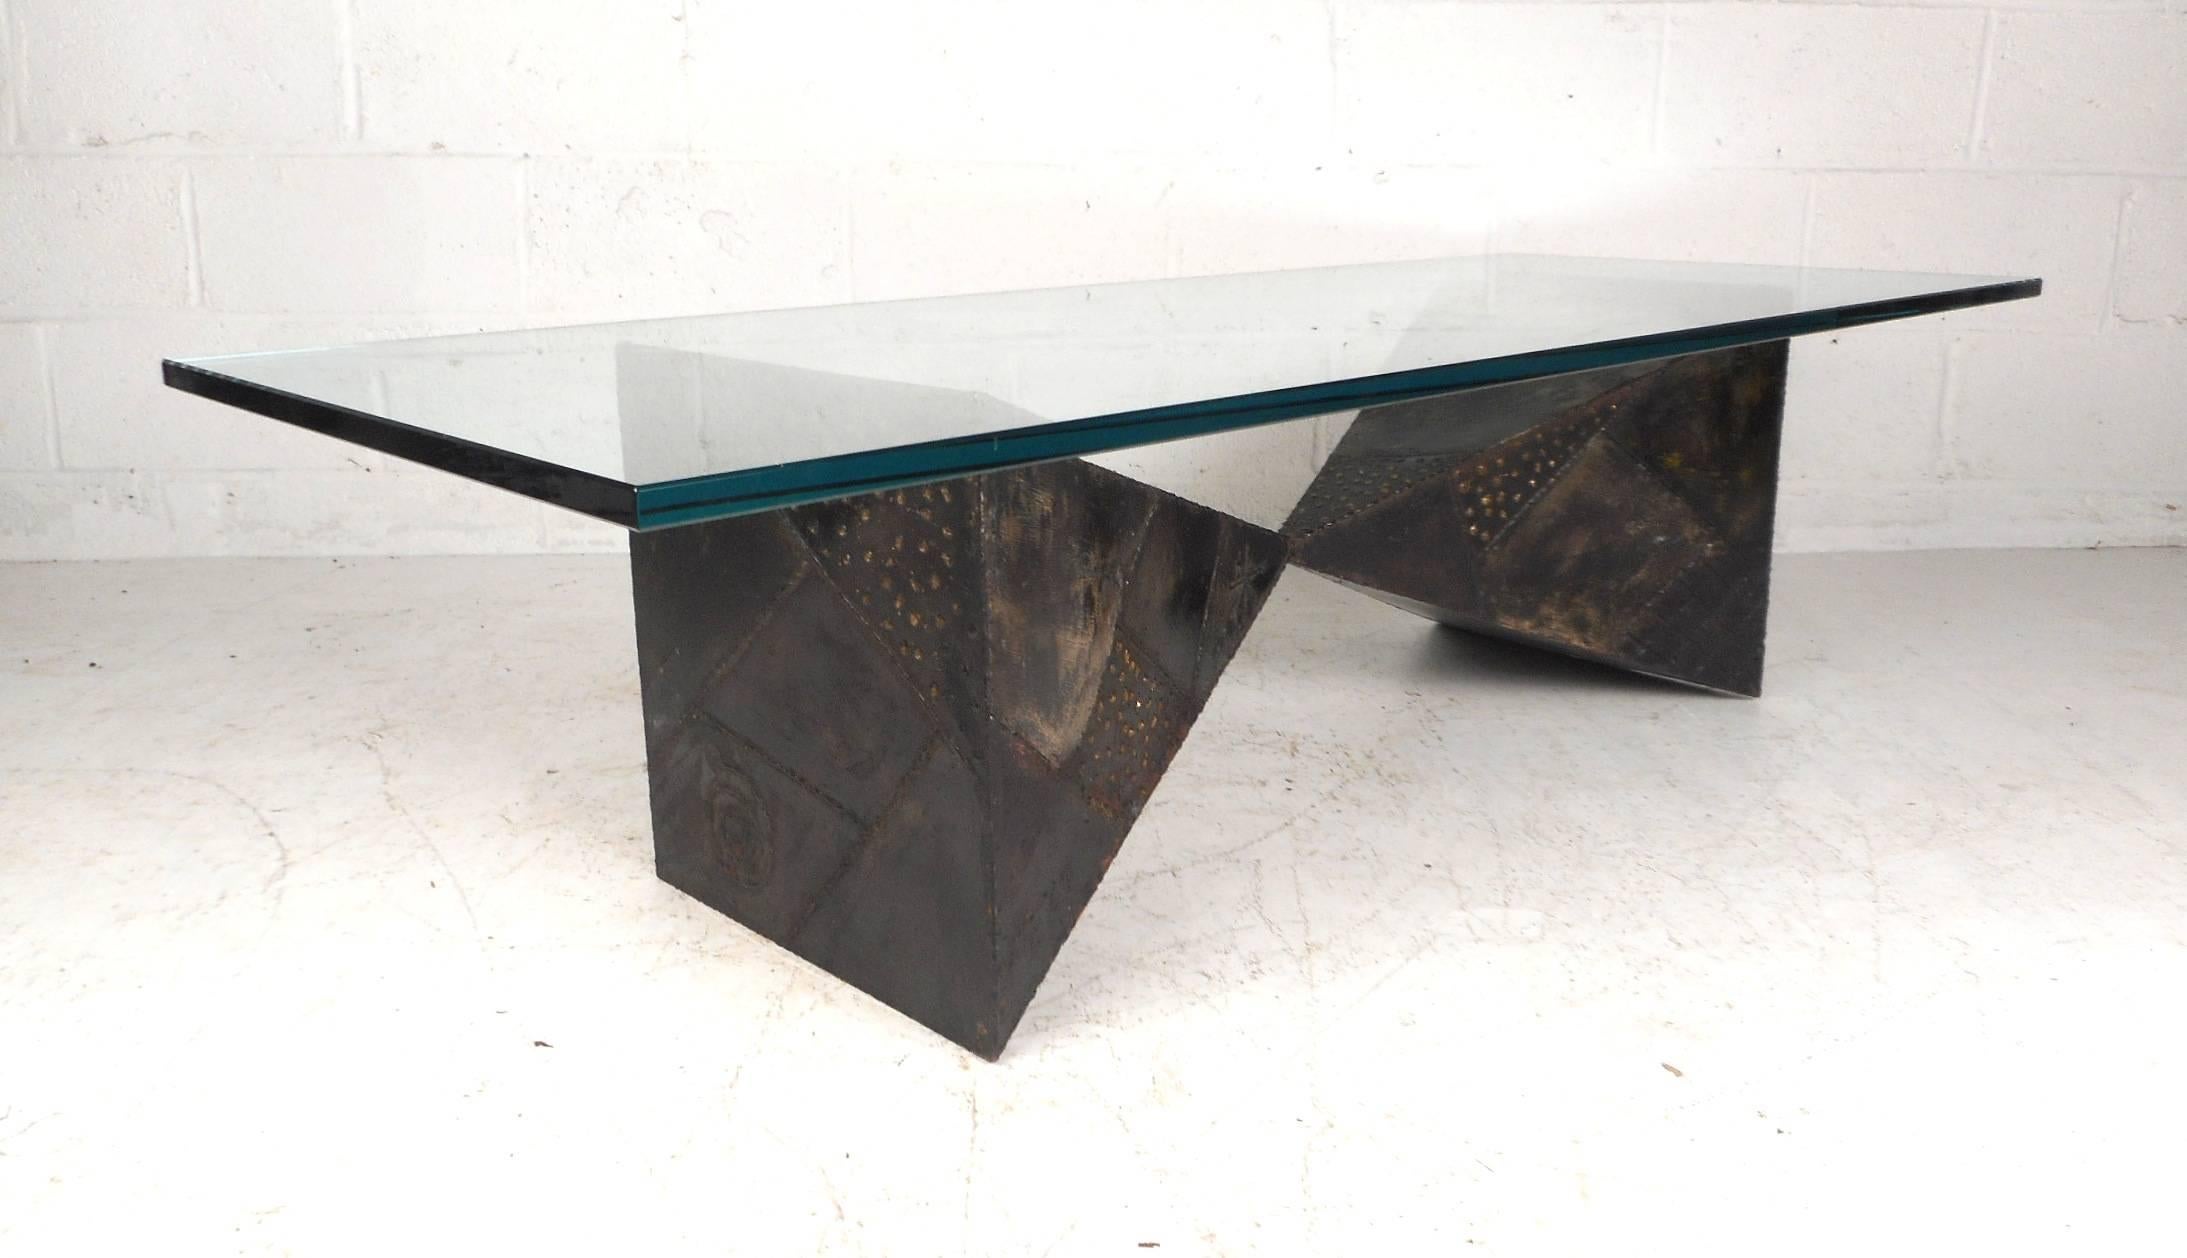 This wonderful Mid-Century Modern coffee table features a beautifully patinated metal base with unusual welded detail. A unique base with two pyramids welded together creating an extremely sturdy foundation for the incredibly thick glass top. This